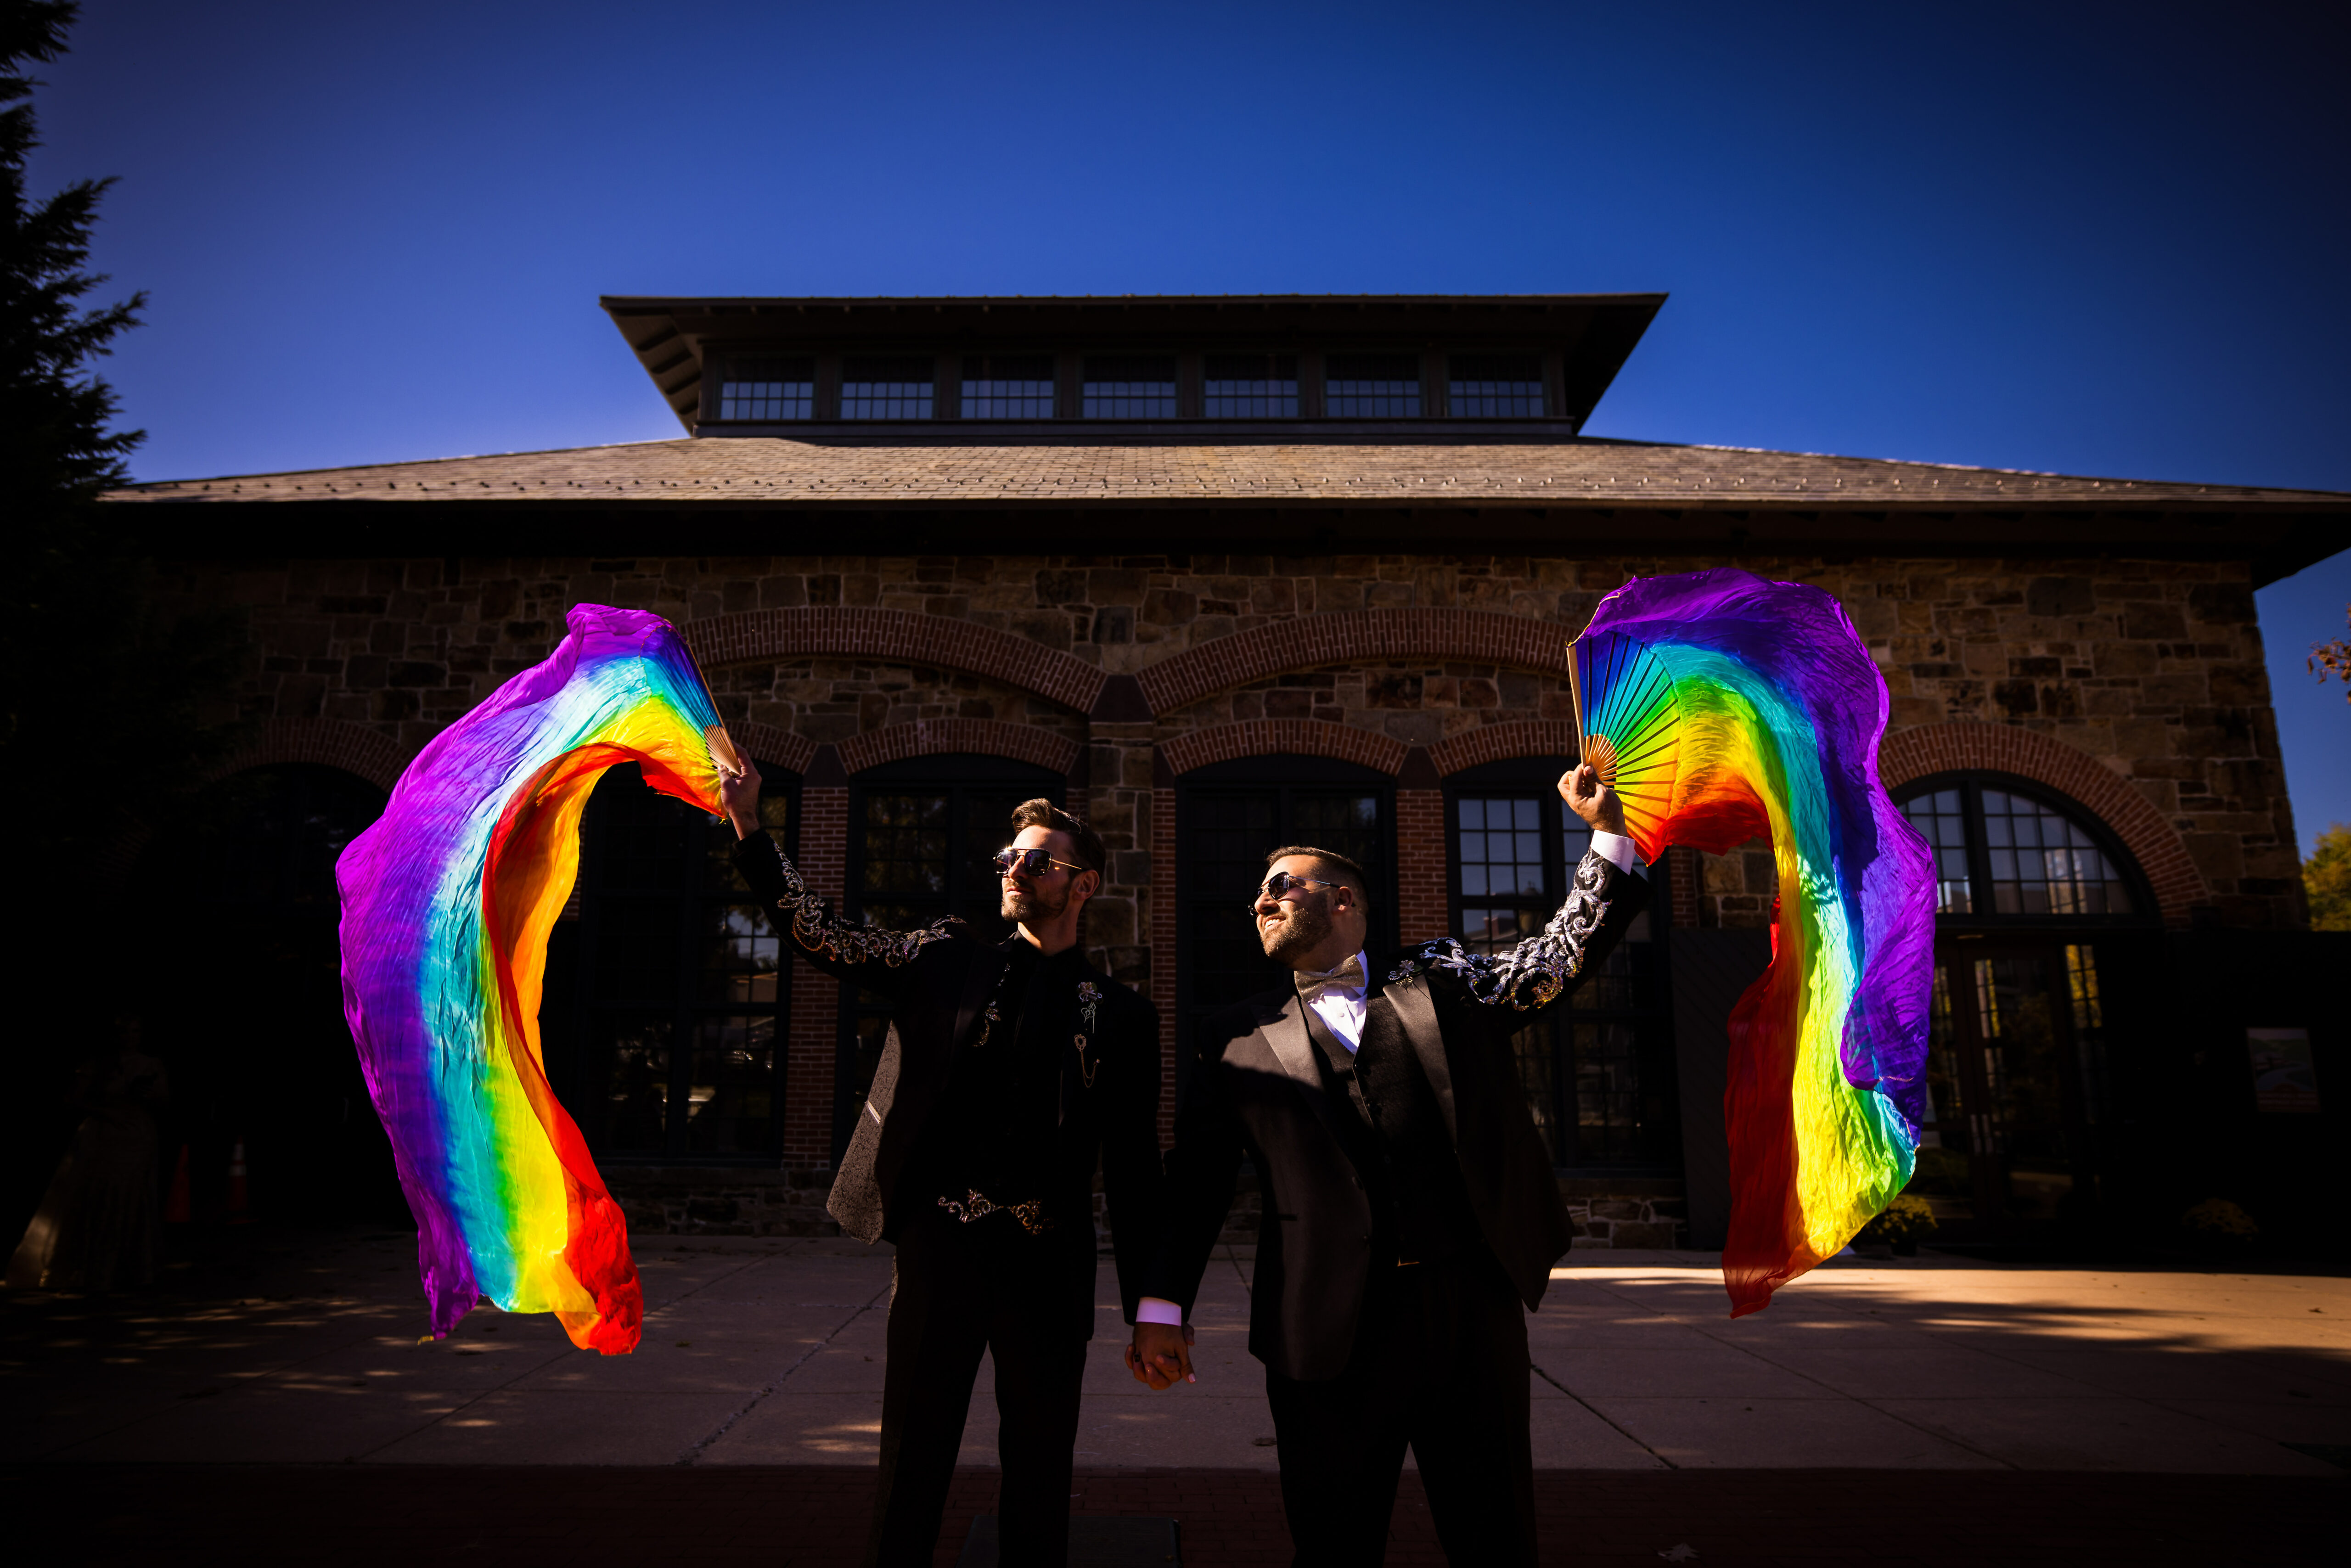 LGBTQ+ Wedding Photographer, Lisa Rhinehart, captures this colorful, fun image of the grooms holding hands as they fly rainbow fans in the air together at their Phoenixville Foundry wedding venue